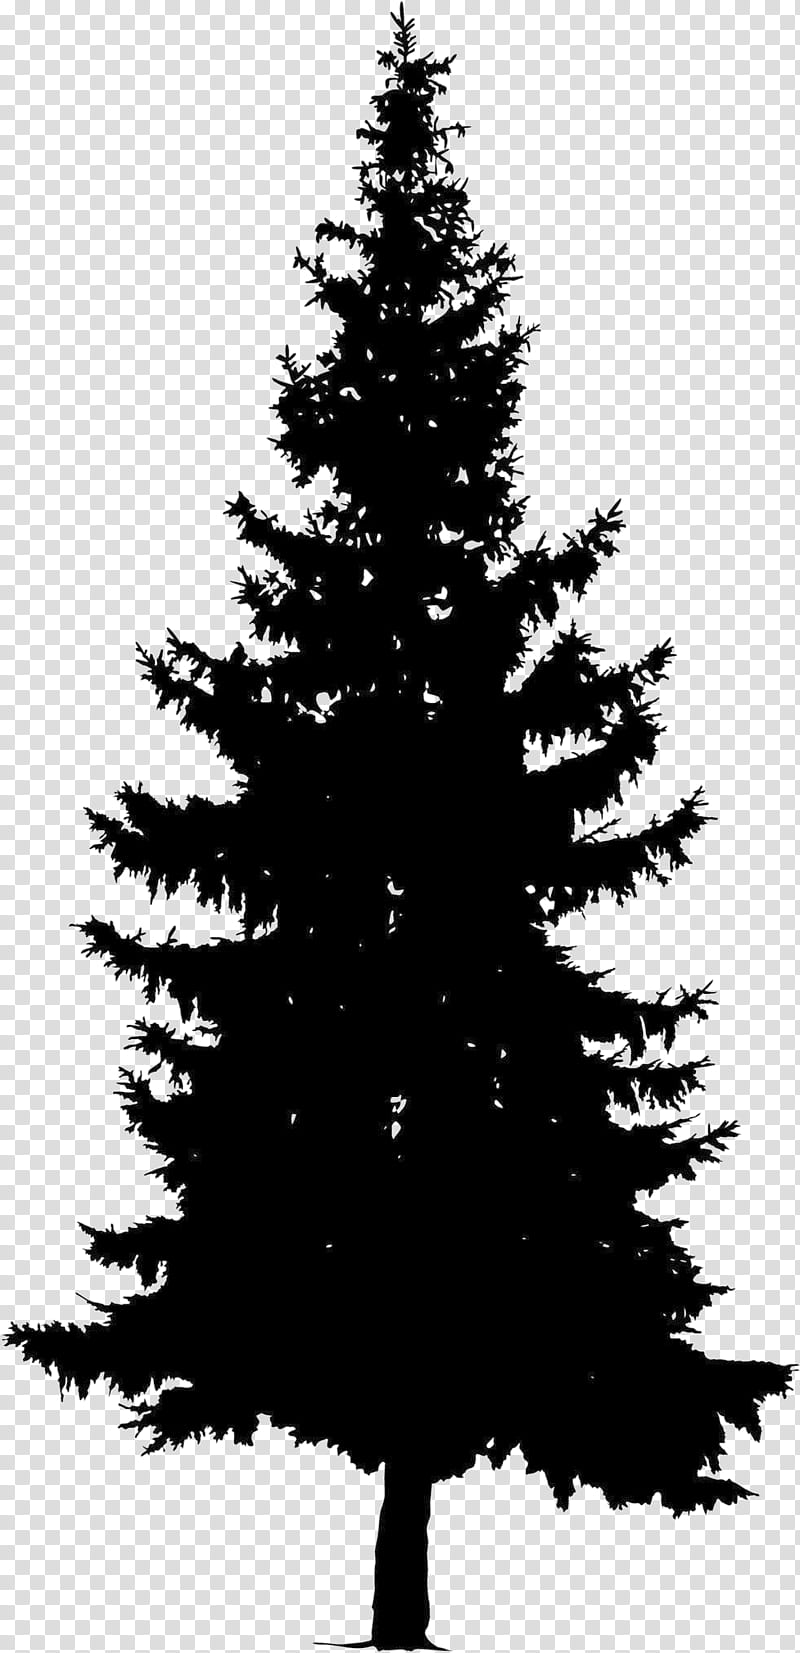 Christmas Black And White, Pine, Silhouette, Drawing, Tree, Fir, Shortleaf Black Spruce, Balsam Fir transparent background PNG clipart